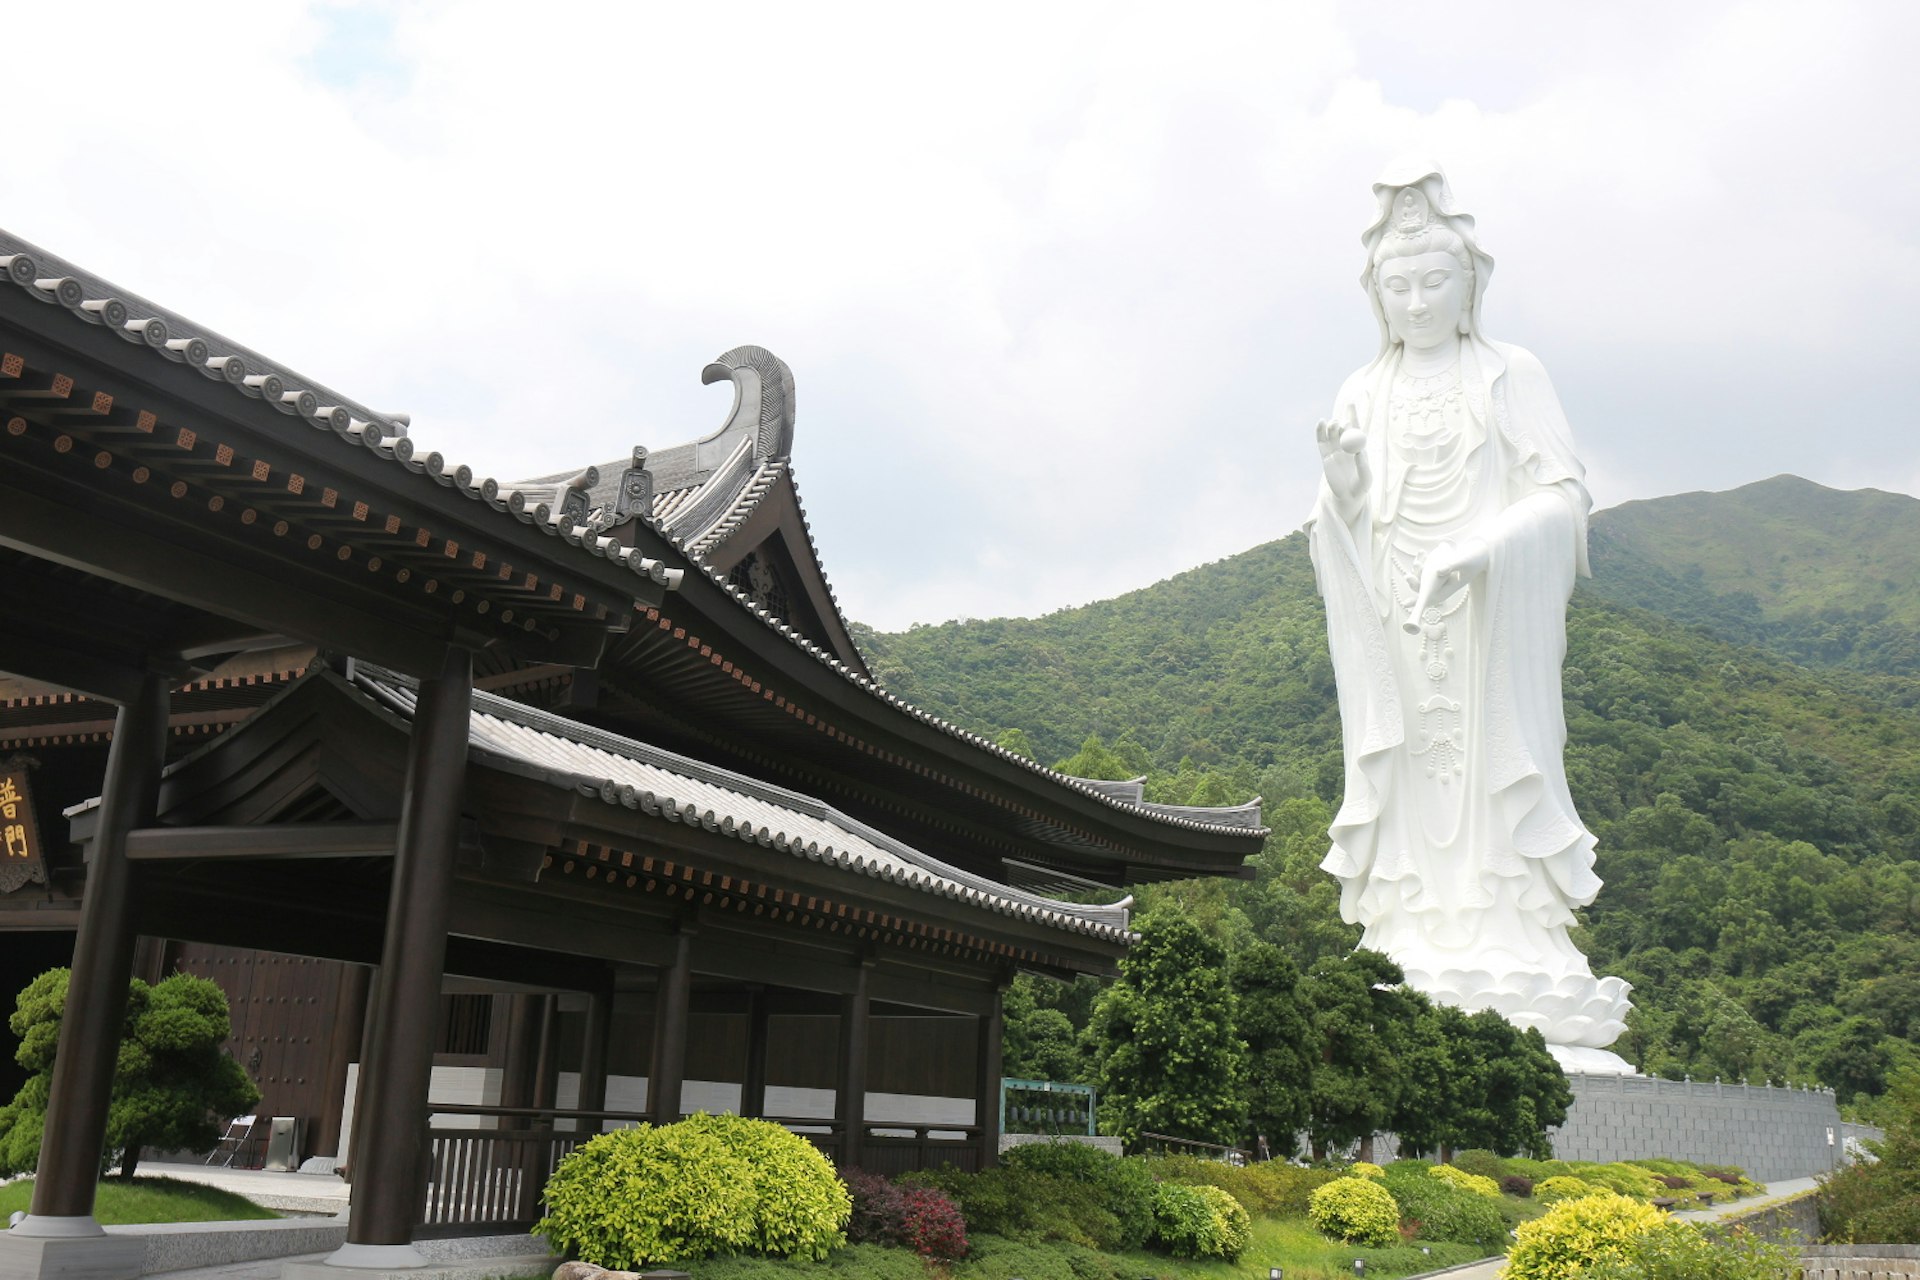 Tsz Shan: modern monastery and well-kept secret. Image by Piera Chen / Lonely Planet